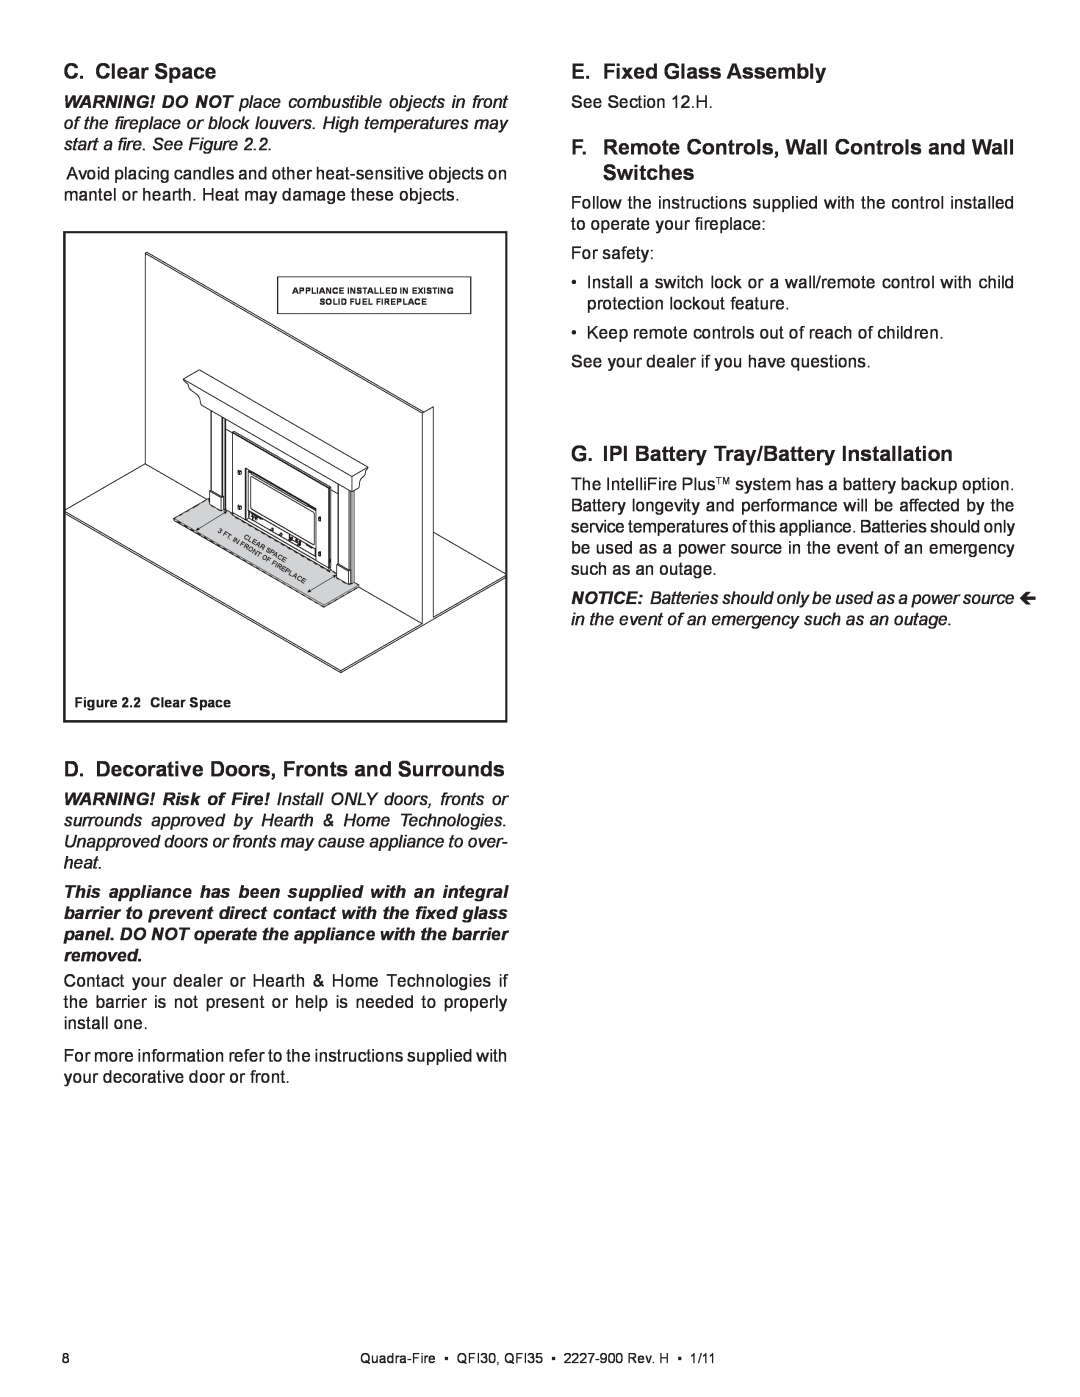 Quadra-Fire QF130 owner manual C. Clear Space, D. Decorative Doors, Fronts and Surrounds, E. Fixed Glass Assembly 